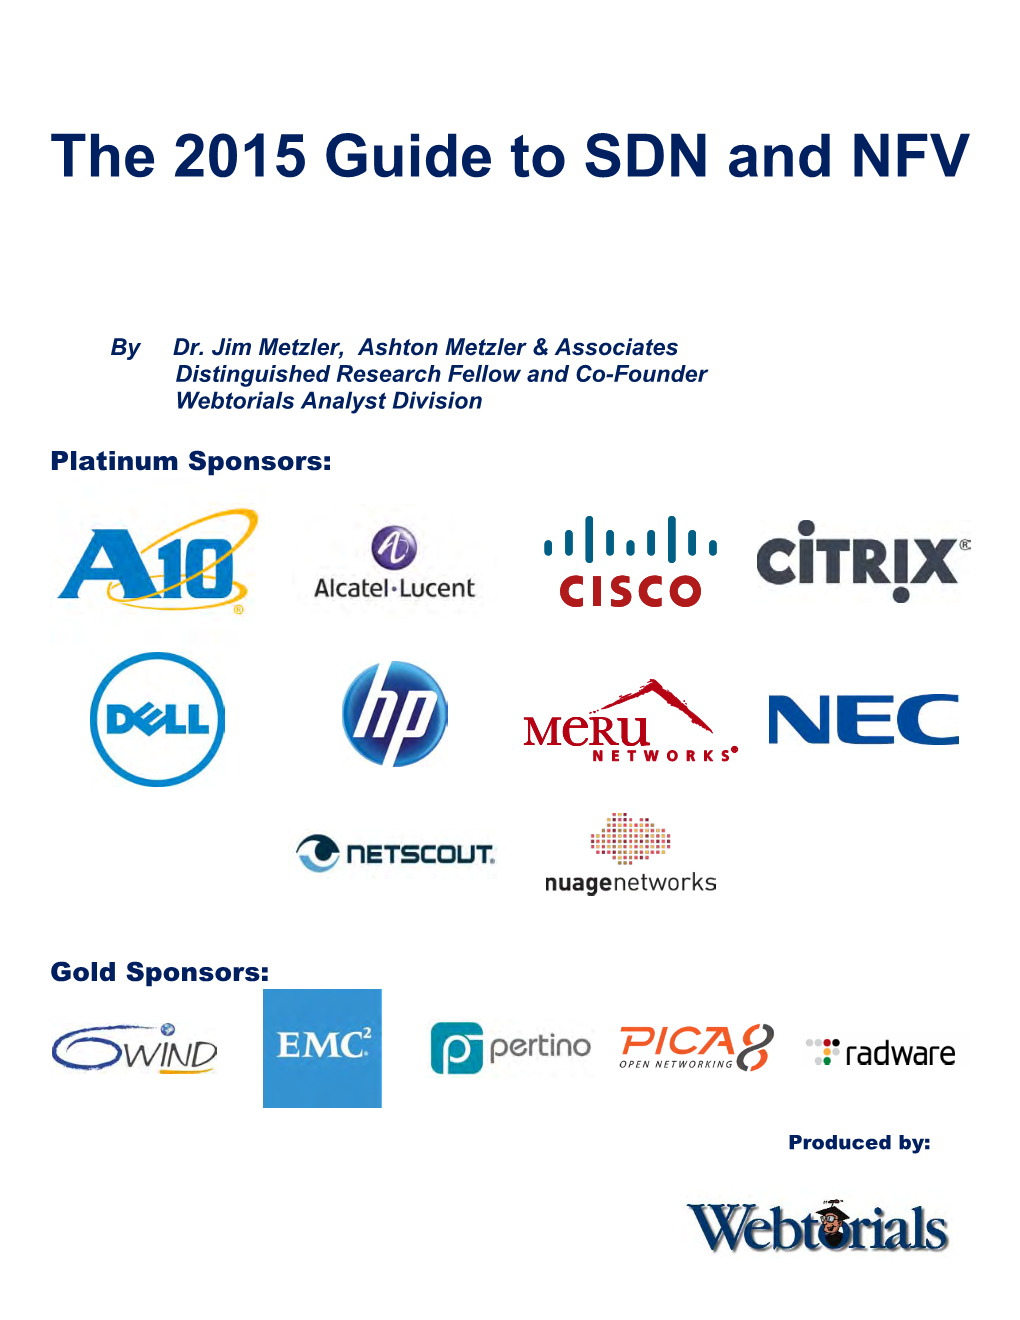 The 2015 Guide to SDN and NFV